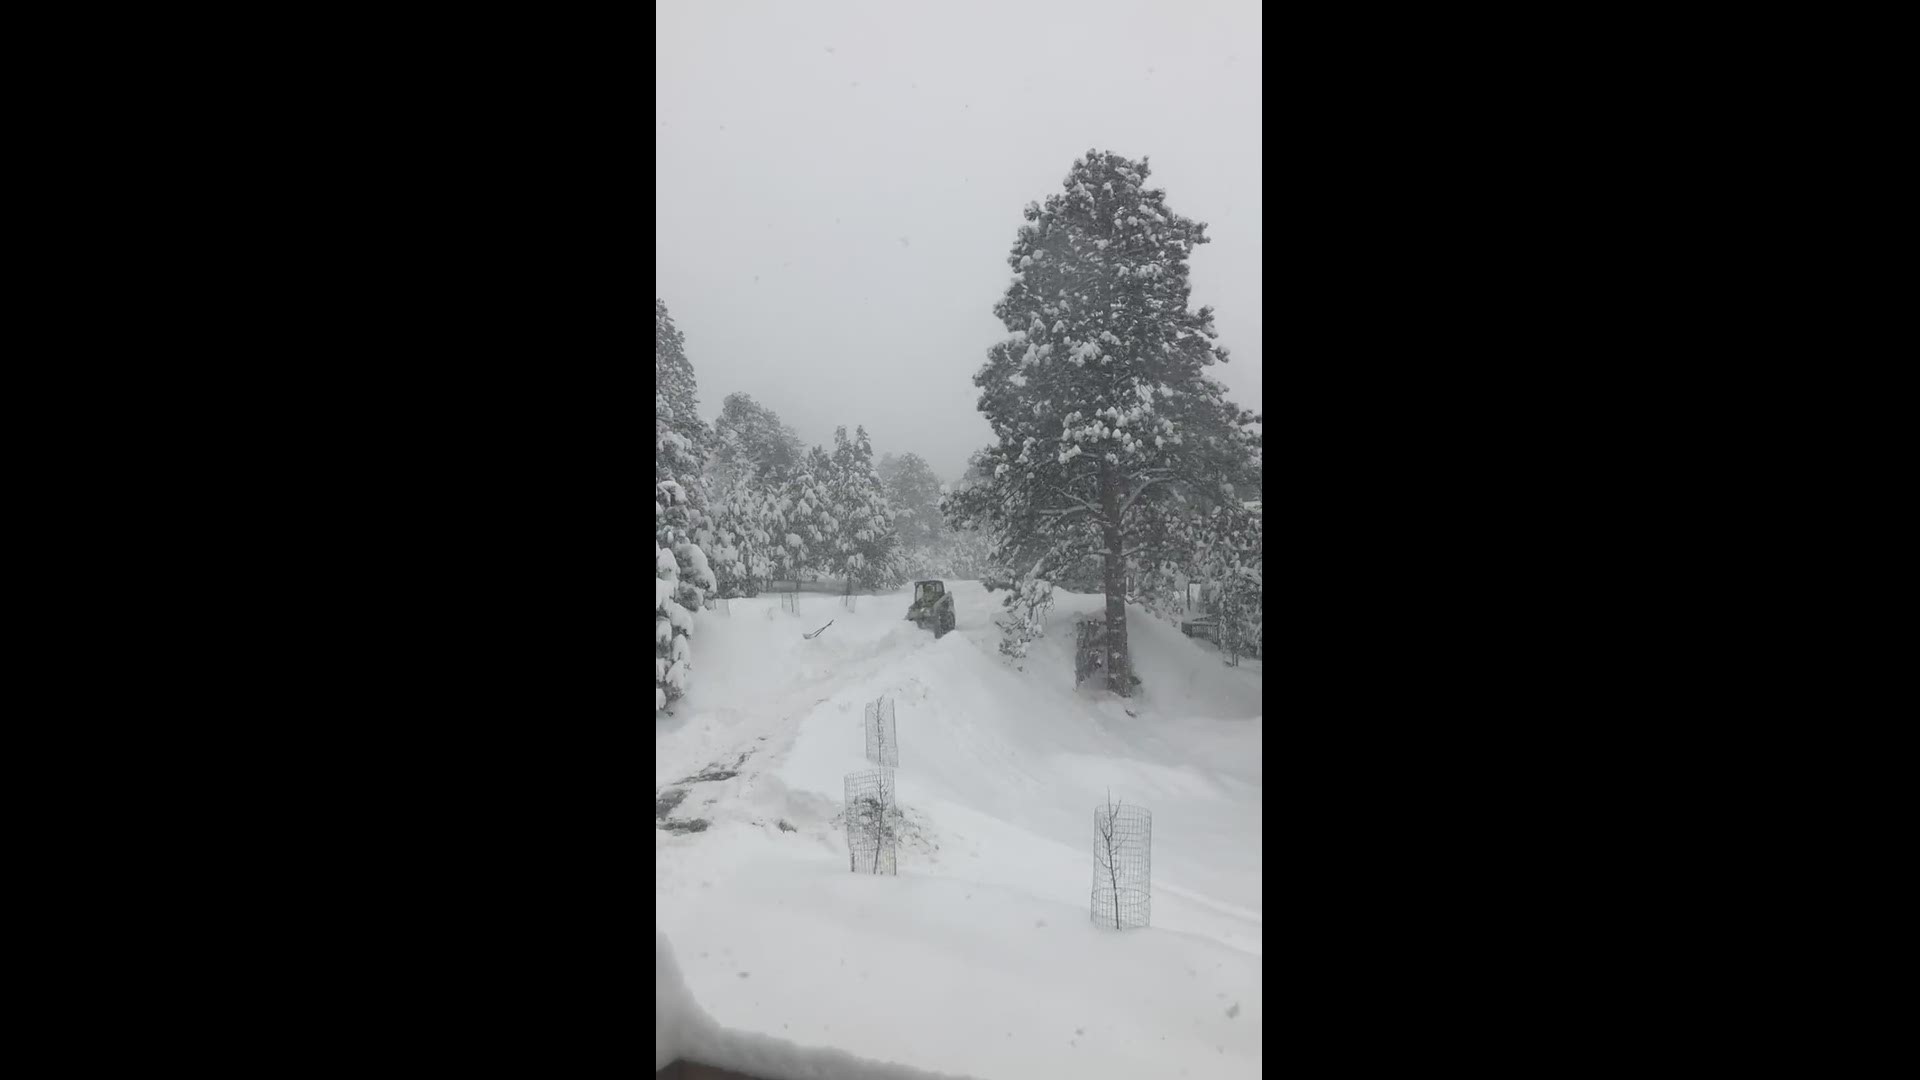 This is the driveway of my house in the Hiwan golf club area of Evergreen Colorado Sunday morning at 11:30am
Credit: Lesly Kenney